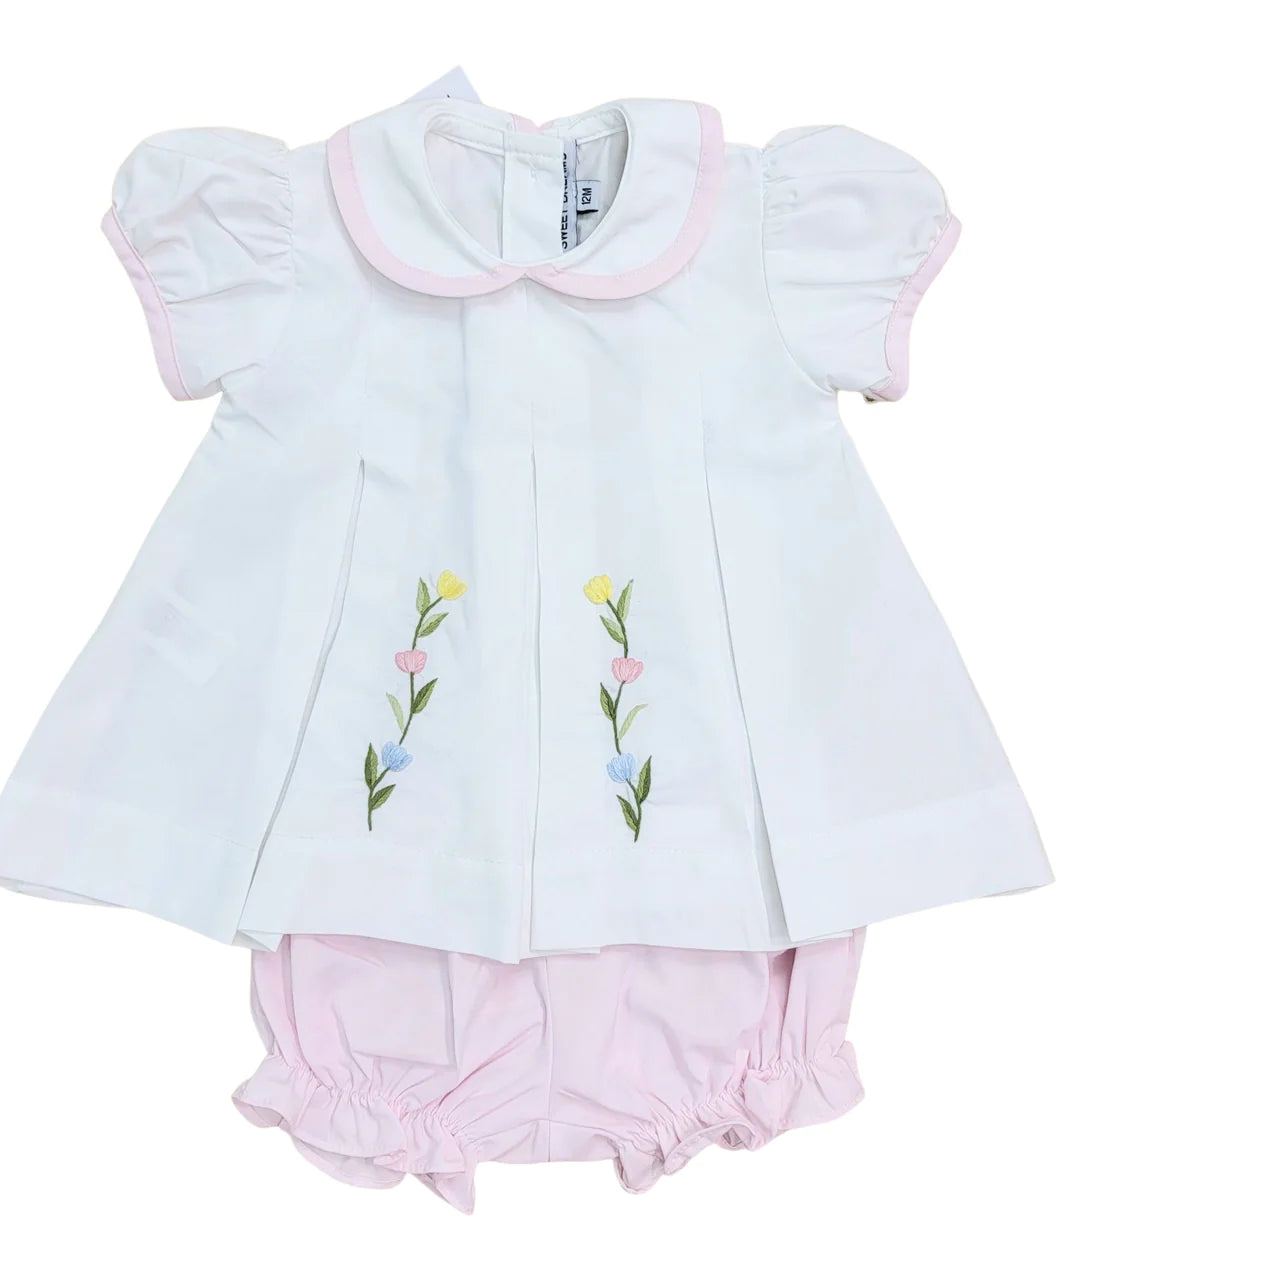 White and Pink Embroidered Tulip Outfit